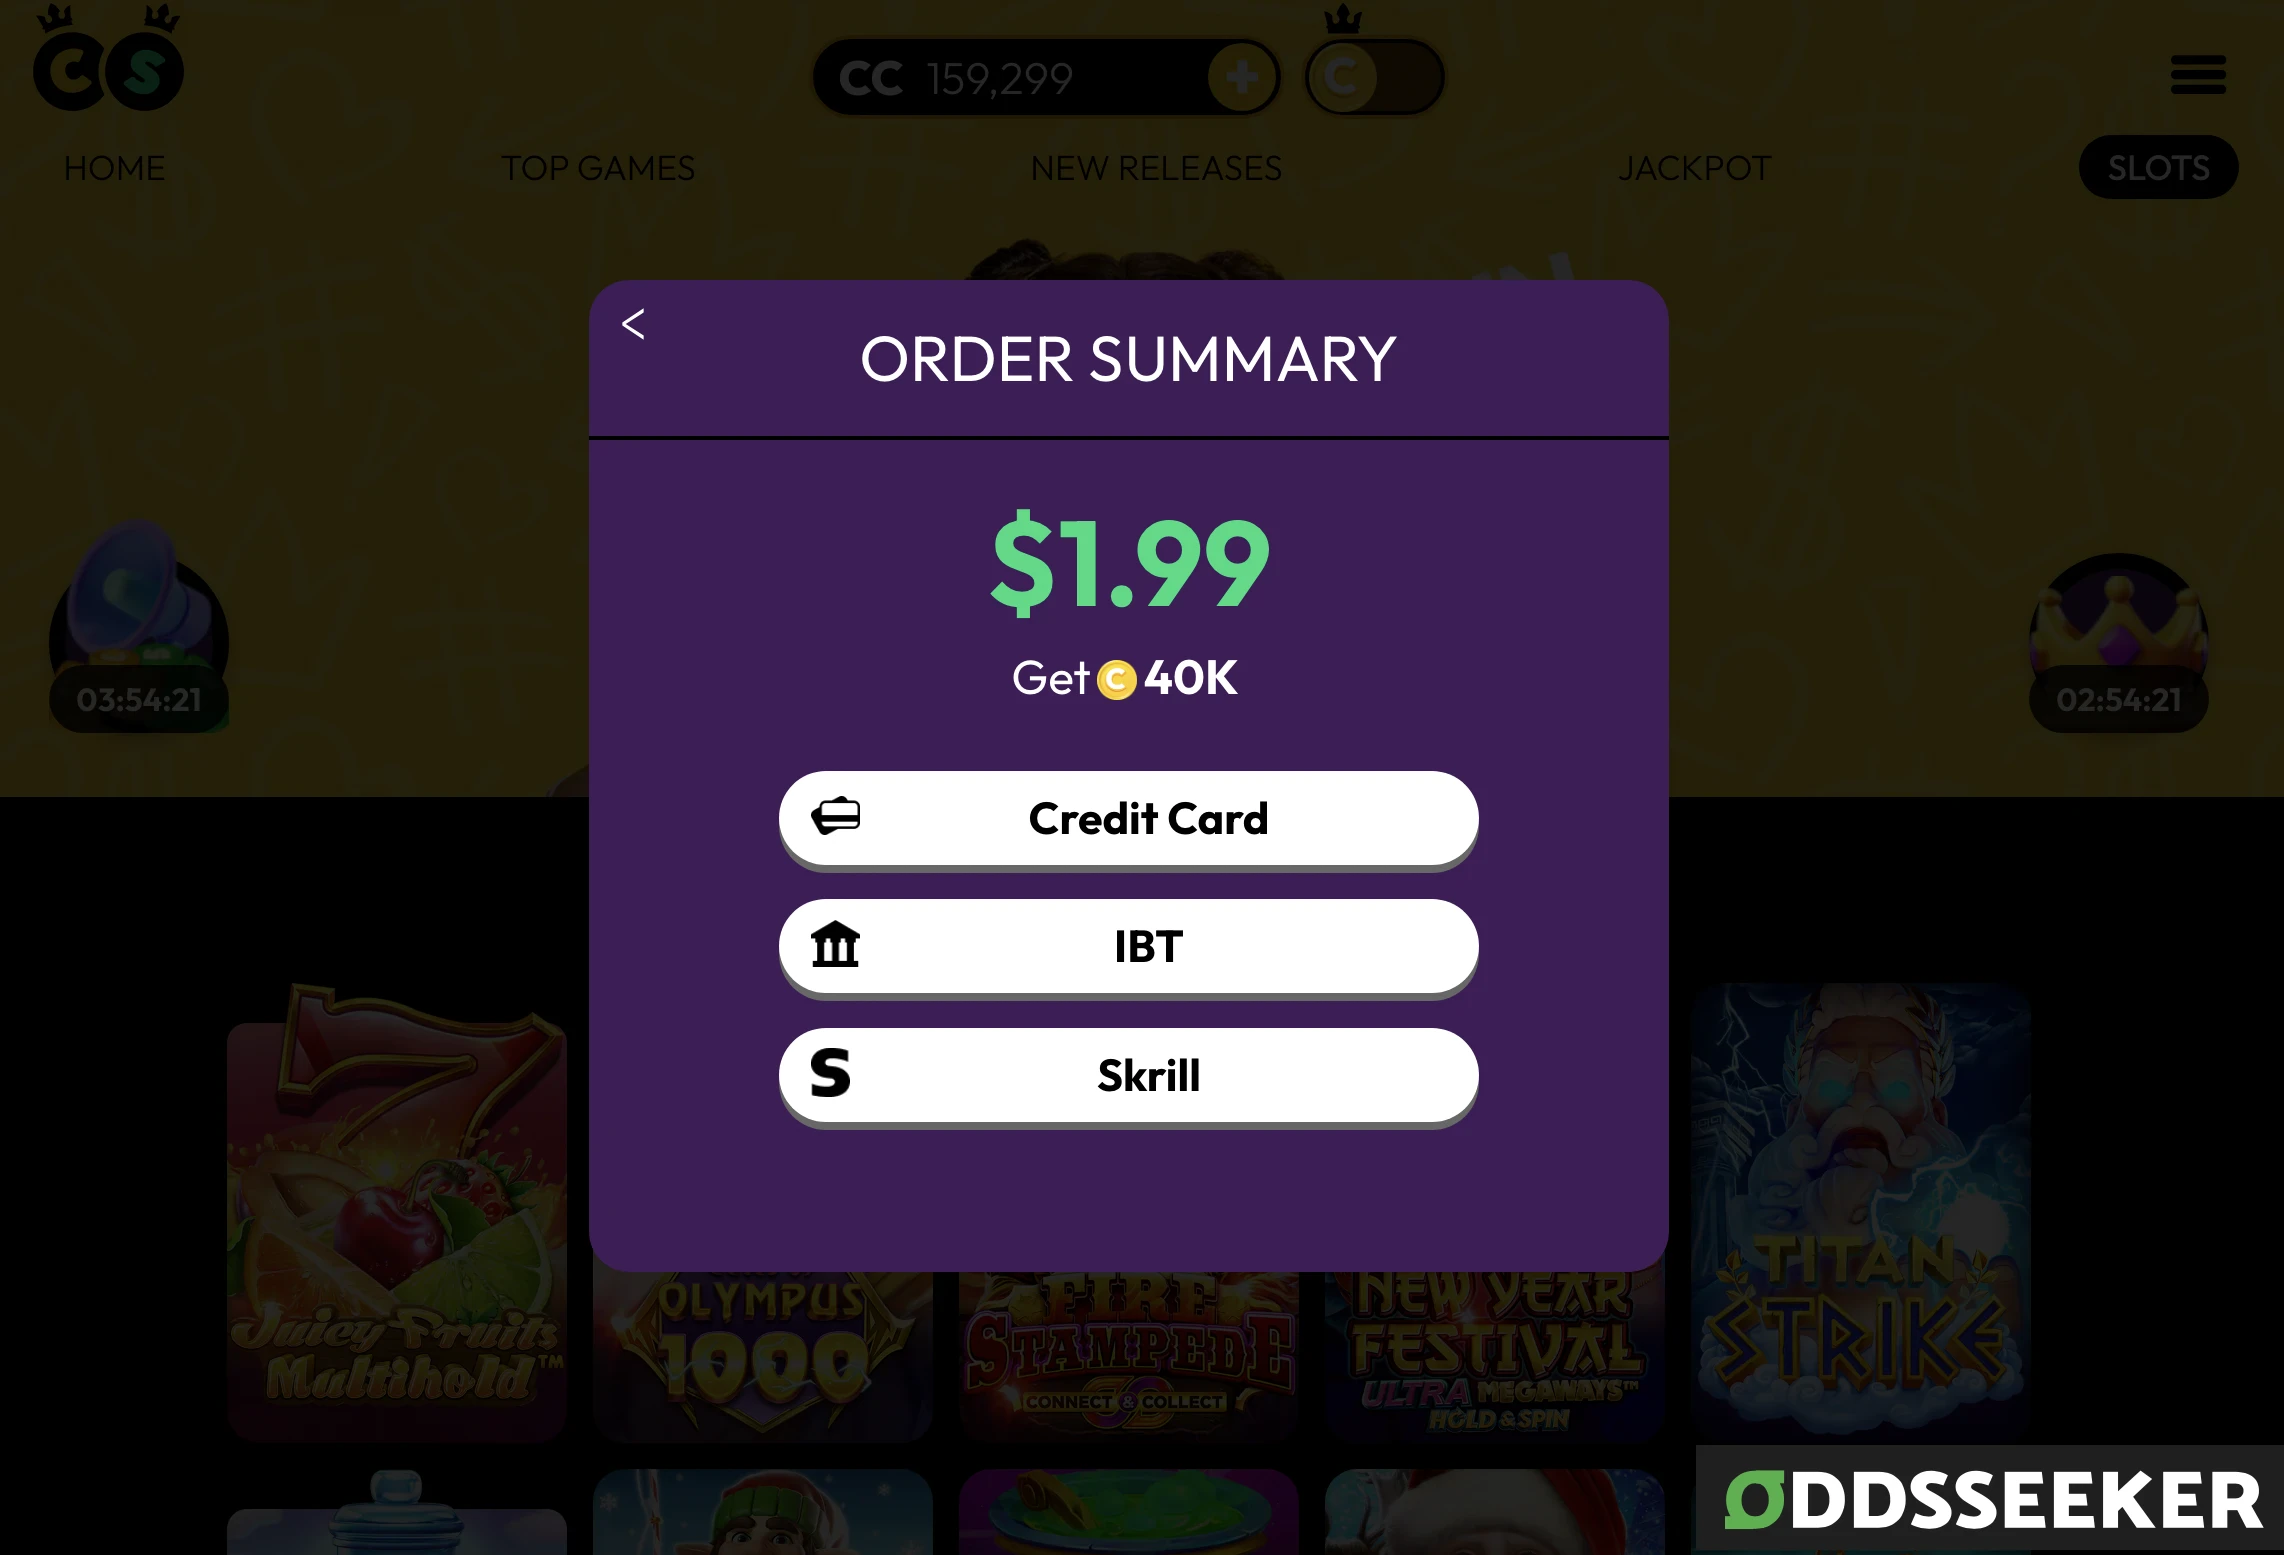 screenshot of CC Casino payment methods, including credit card, IBT, and Skrill on